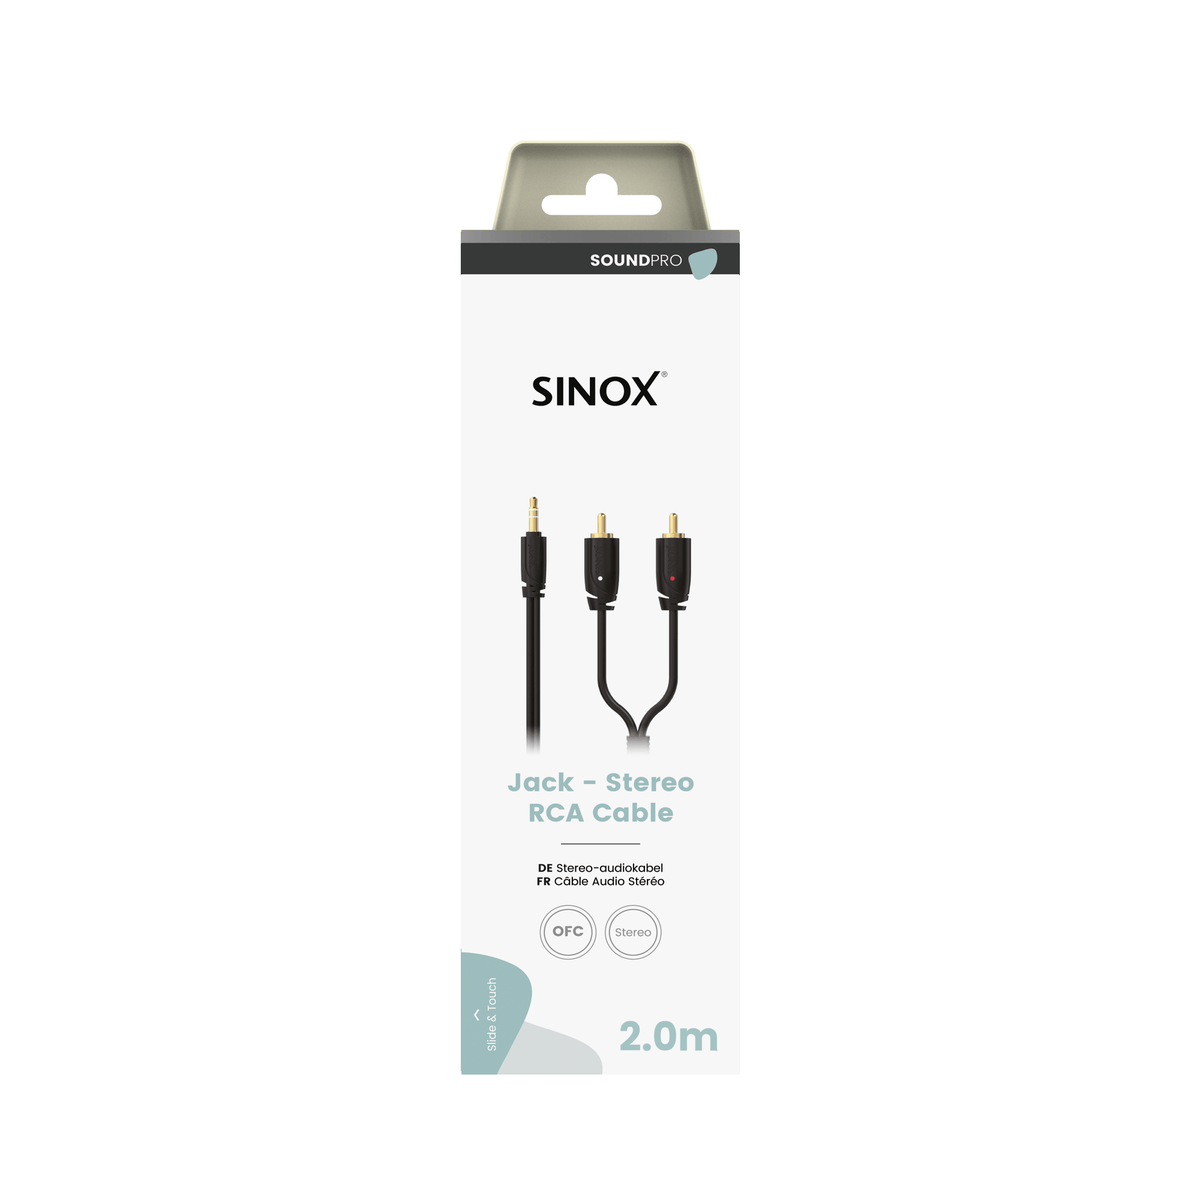 Sinox Sound Pro 2M 3.5mm Mini Jack to Stereo Cable - Black | 52177 from Sinox - DID Electrical